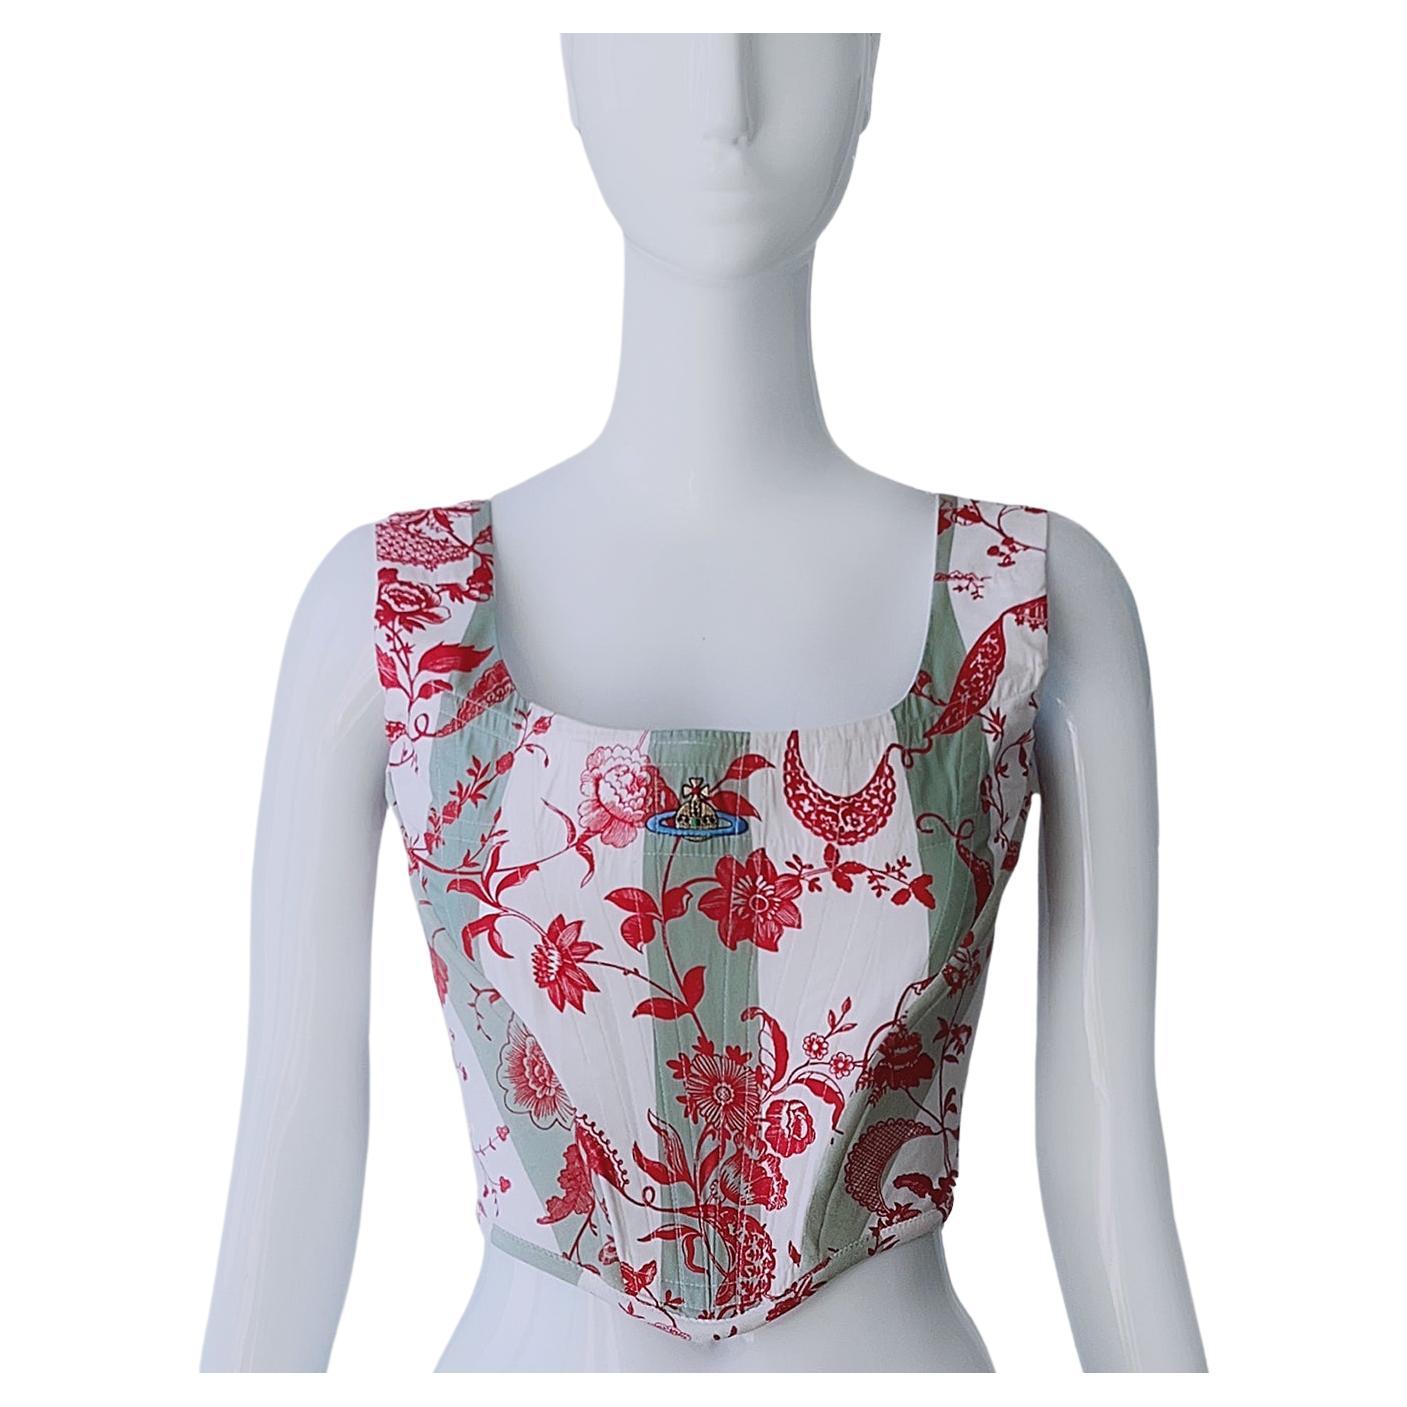 Vivienne Westwood Corset Iconic Rare 90s Red Label For Sale